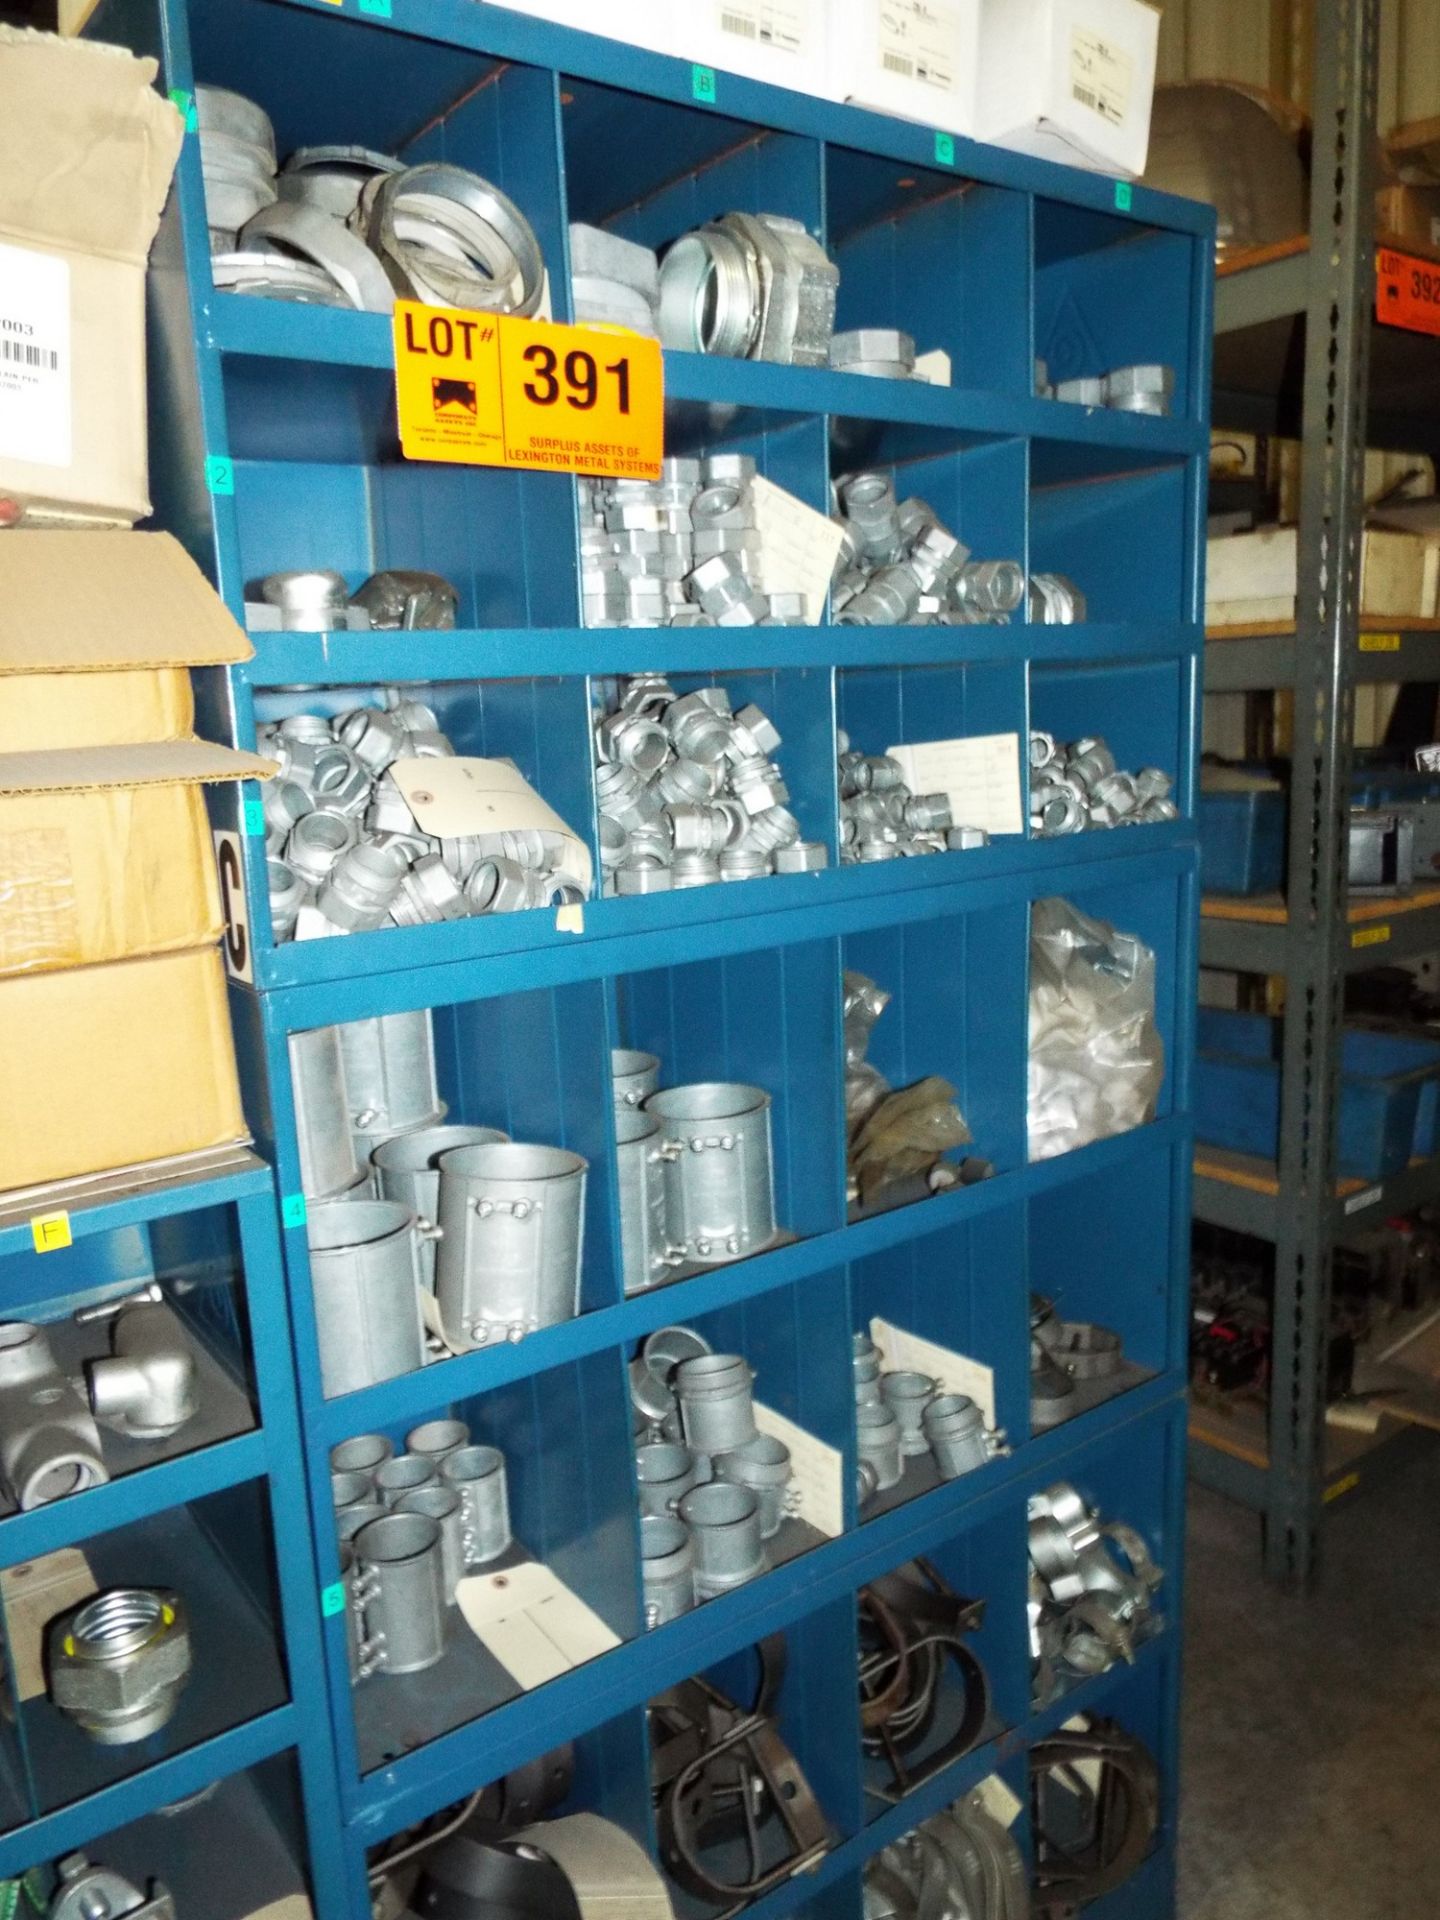 LOT/ PIGEON HOLE CABINETS WITH CONTENTS - ELECTRICAL CONDUIT FITTINGS, HANGERS, BRASS VALVES, PVC